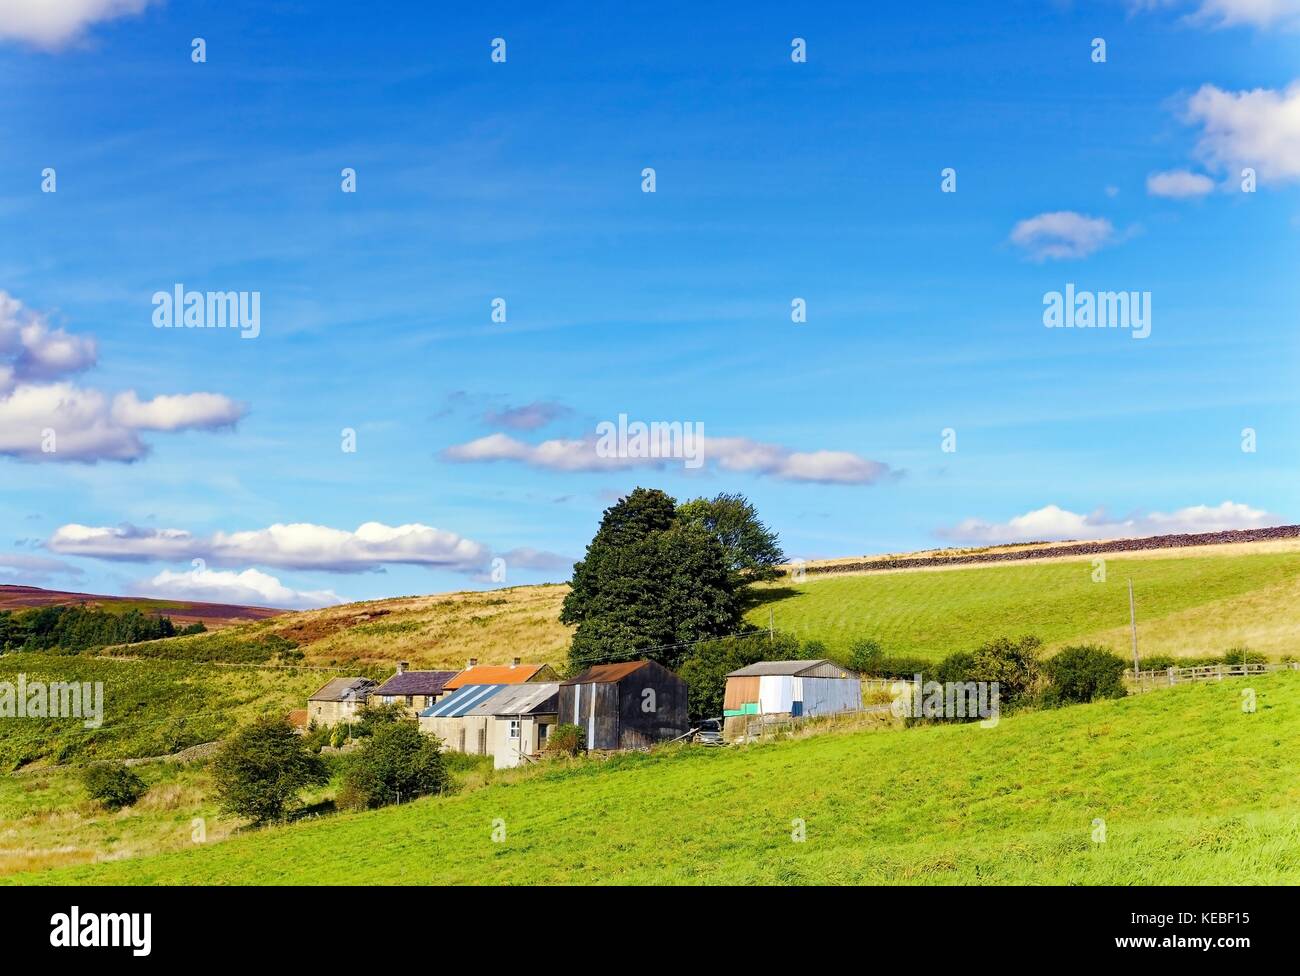 A summer view of a group of farm buildings and trees on Danby Low Moor in the North Yorkshire Moors, England. Stock Photo